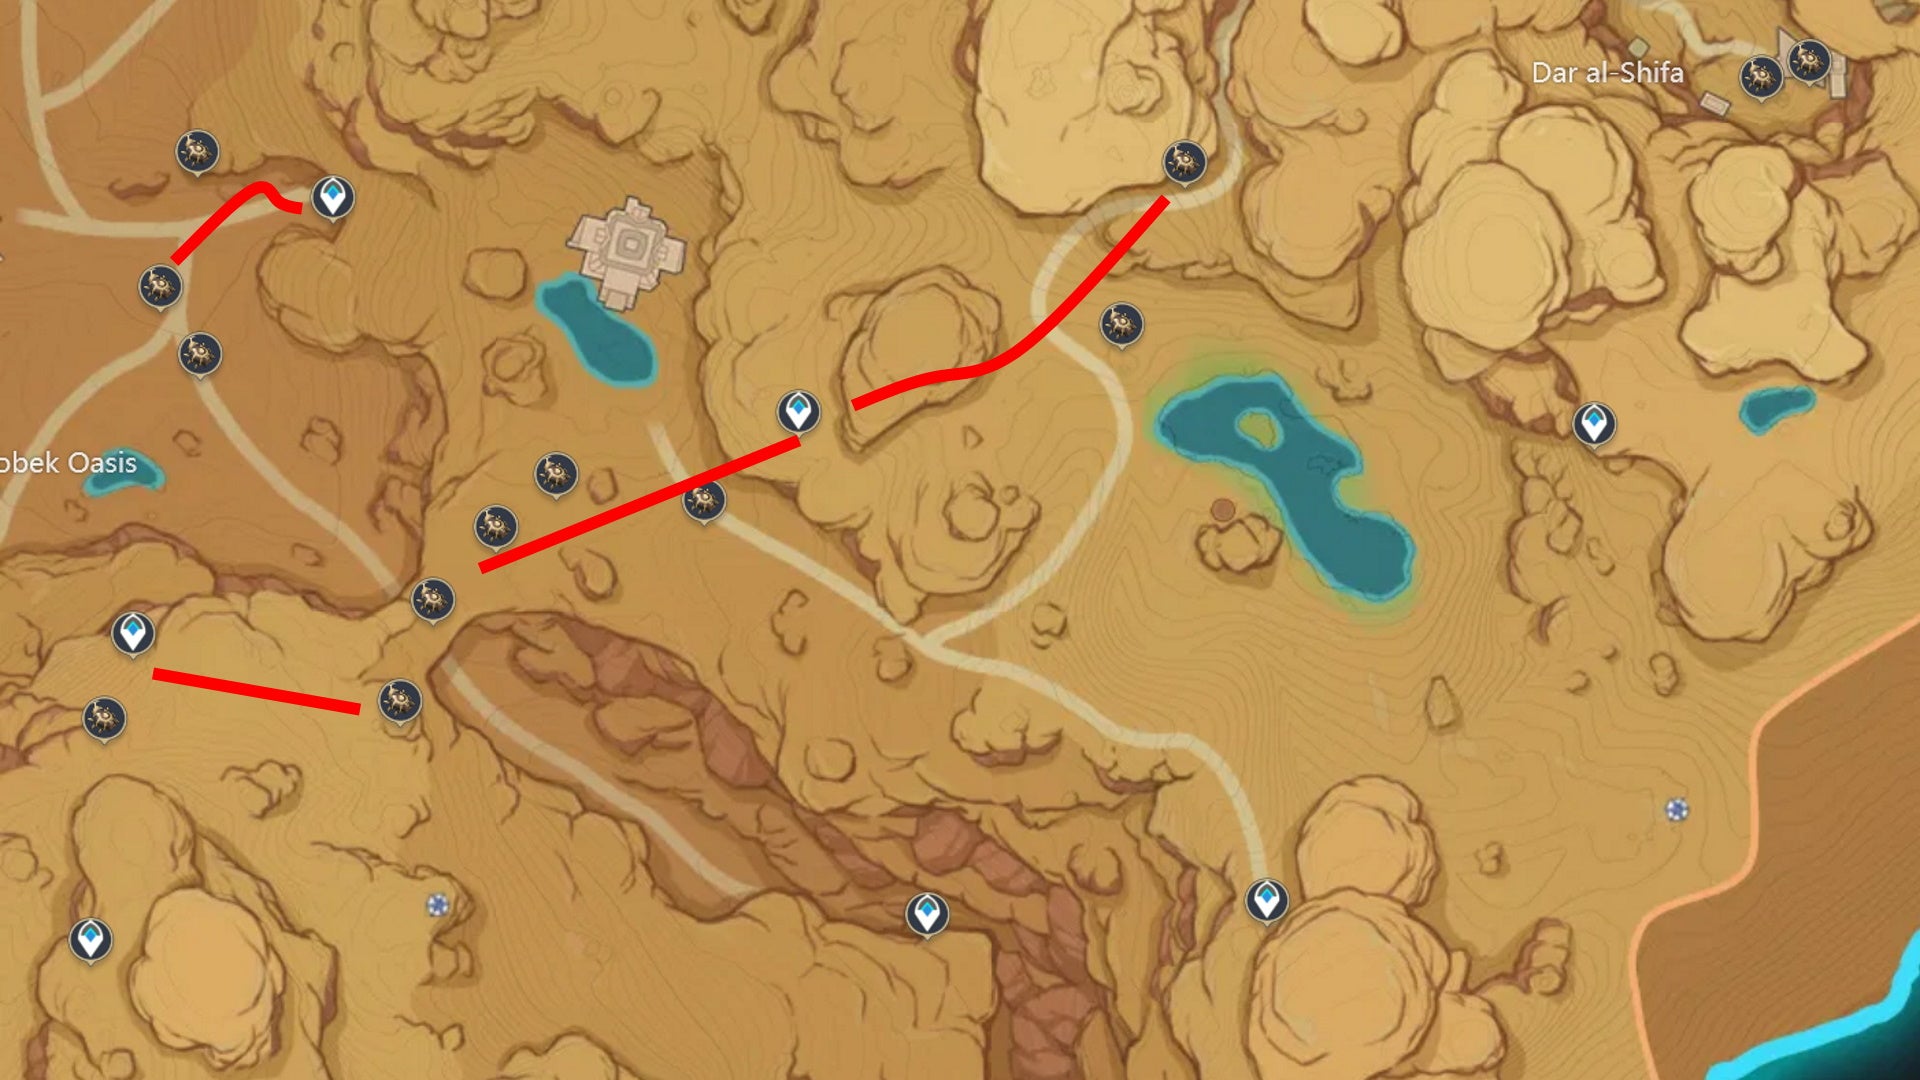 Genshin Impact Scarab locations: A map showing scarab farm routes near Sobek Oasis